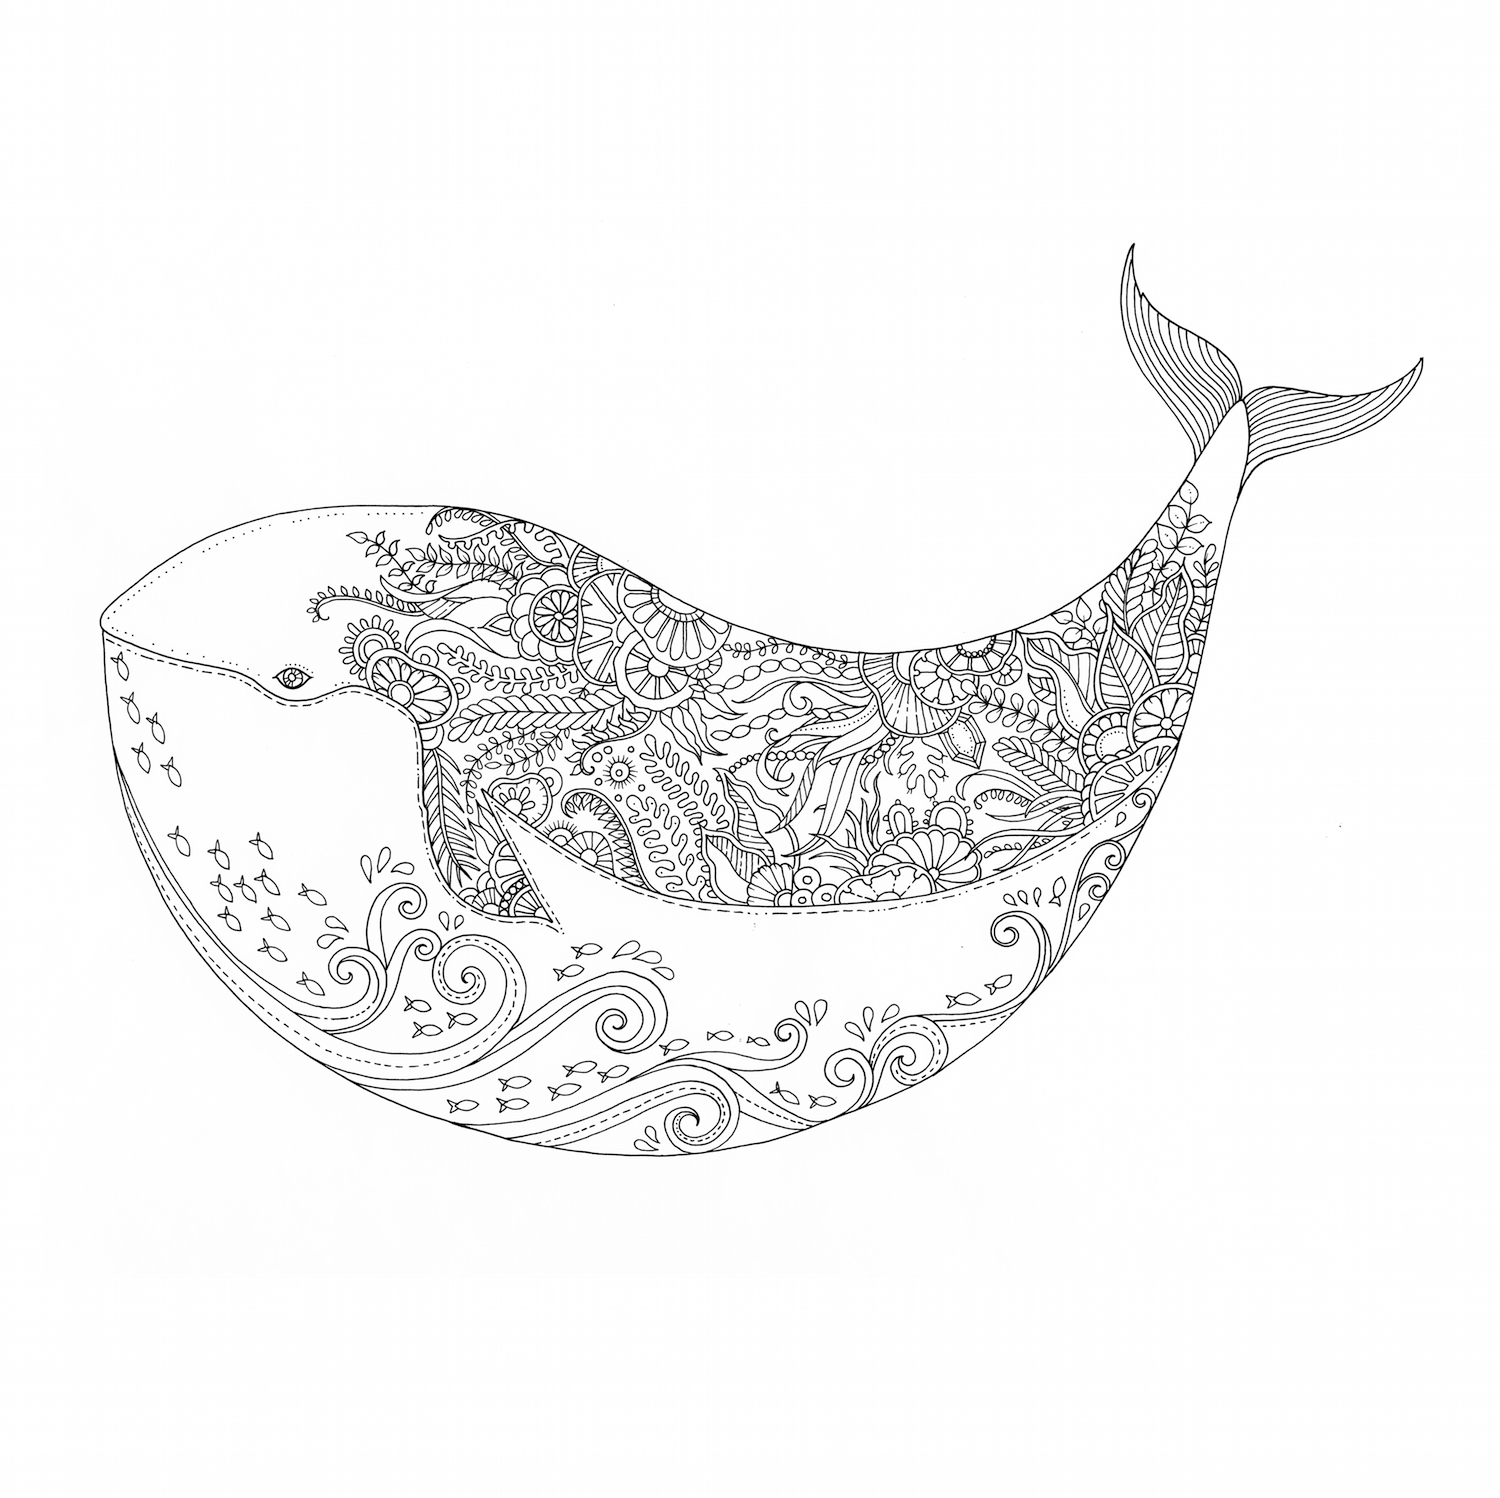 Lost Ocean Coloring Book Pages Coloring The Great Black White Whale Literary Hub